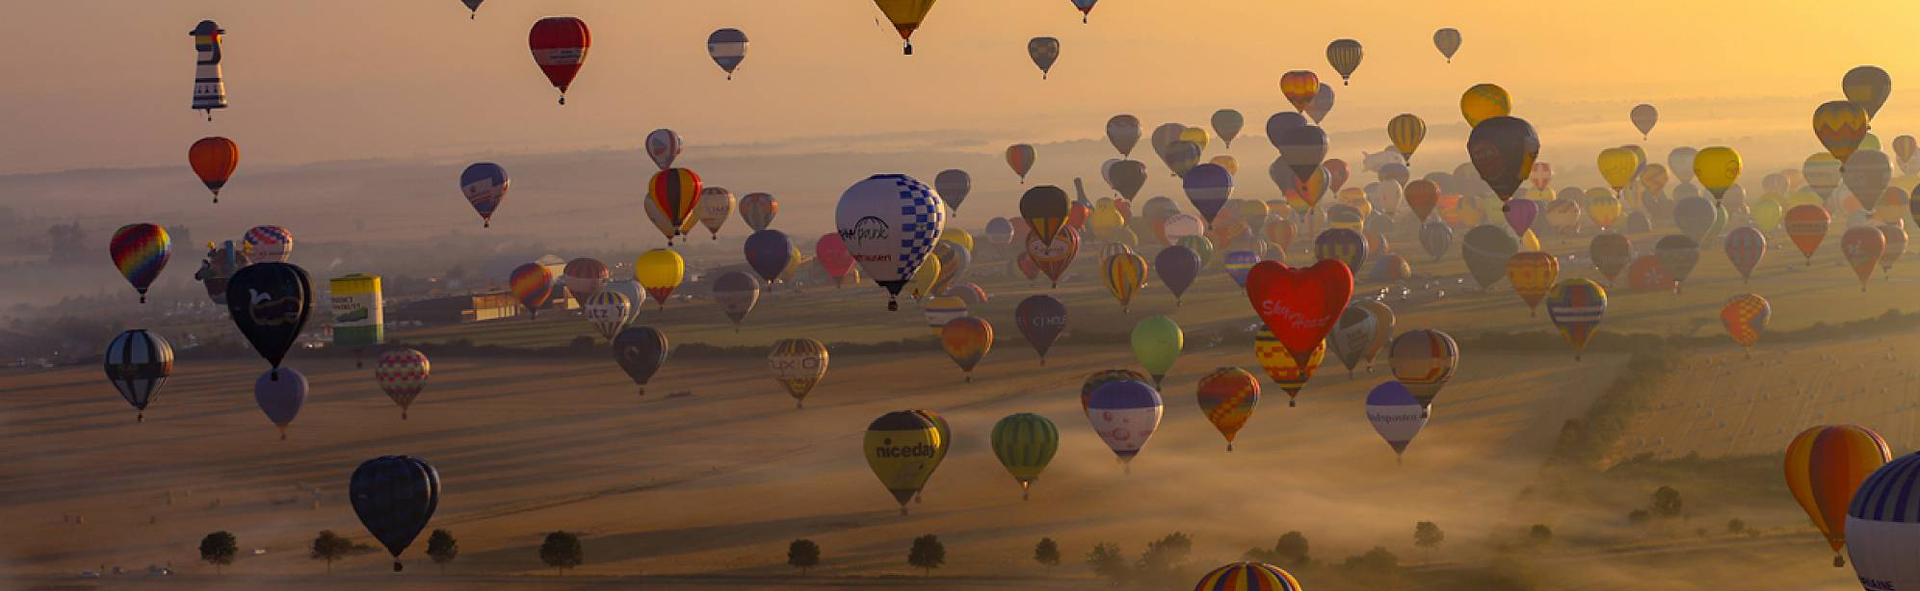 Hot air Balloon rides Hampshire and Wiltshire